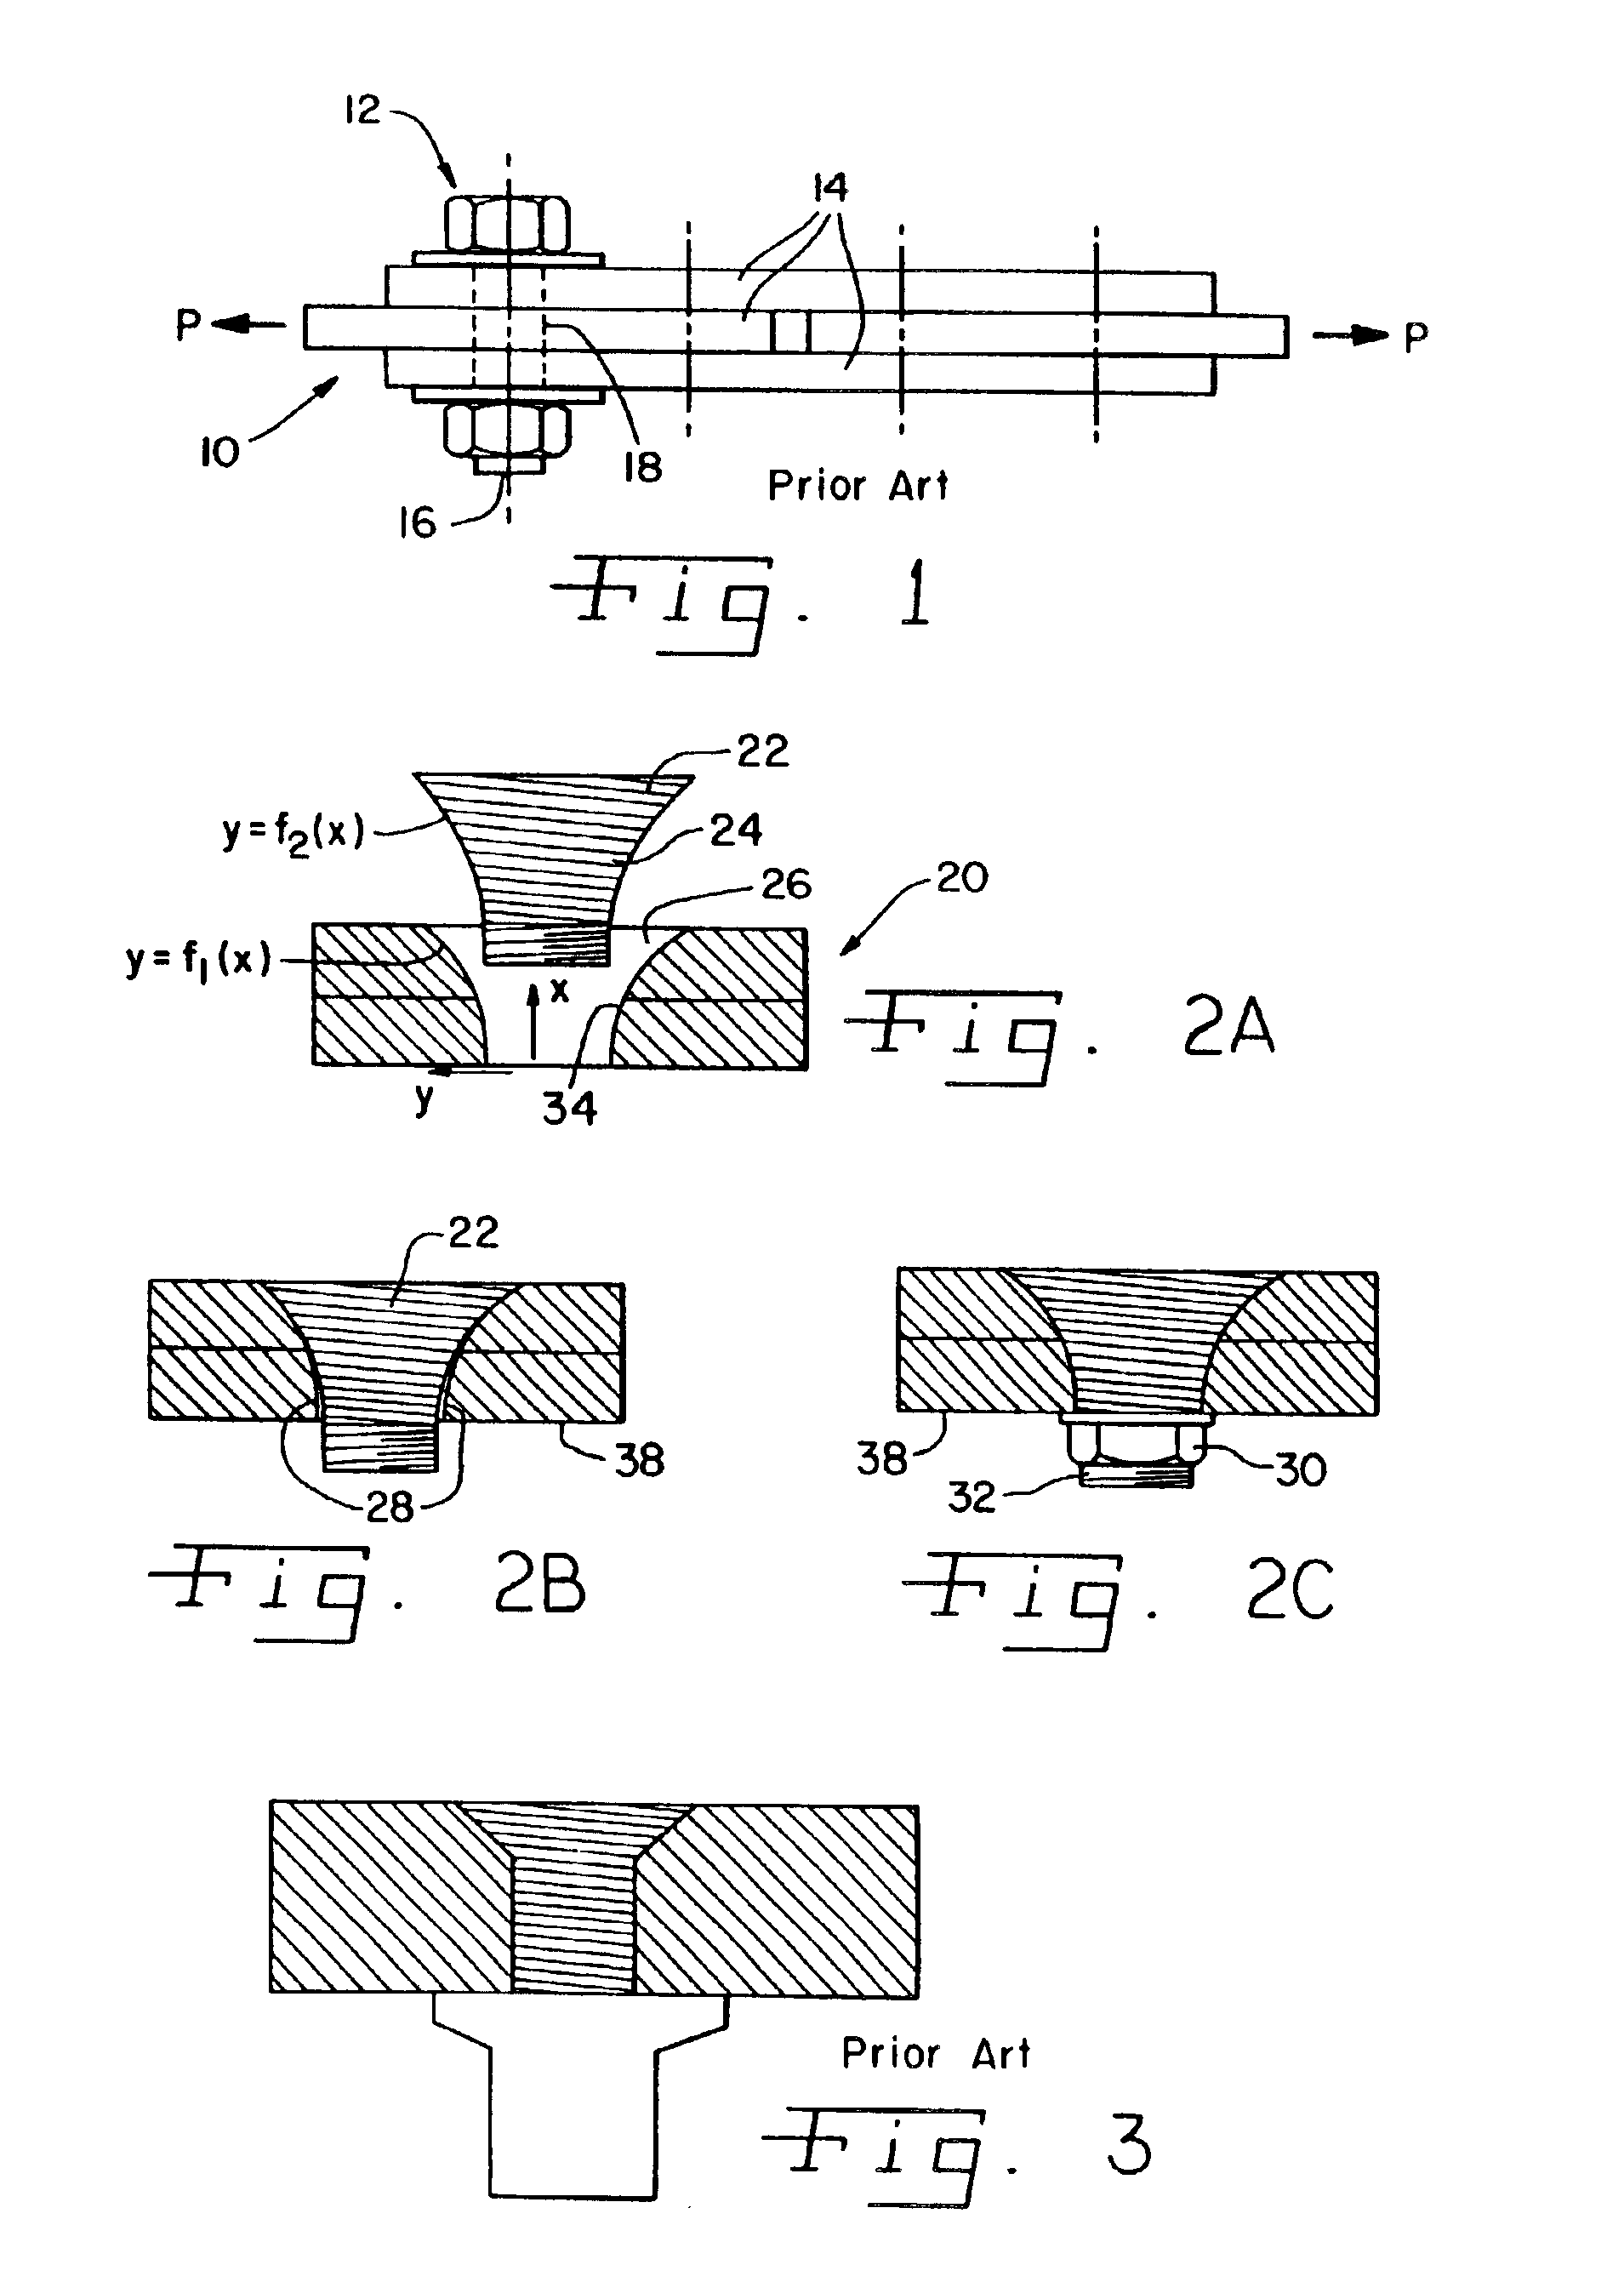 Fastening assembly and method for fastening a multi-layered laminate together